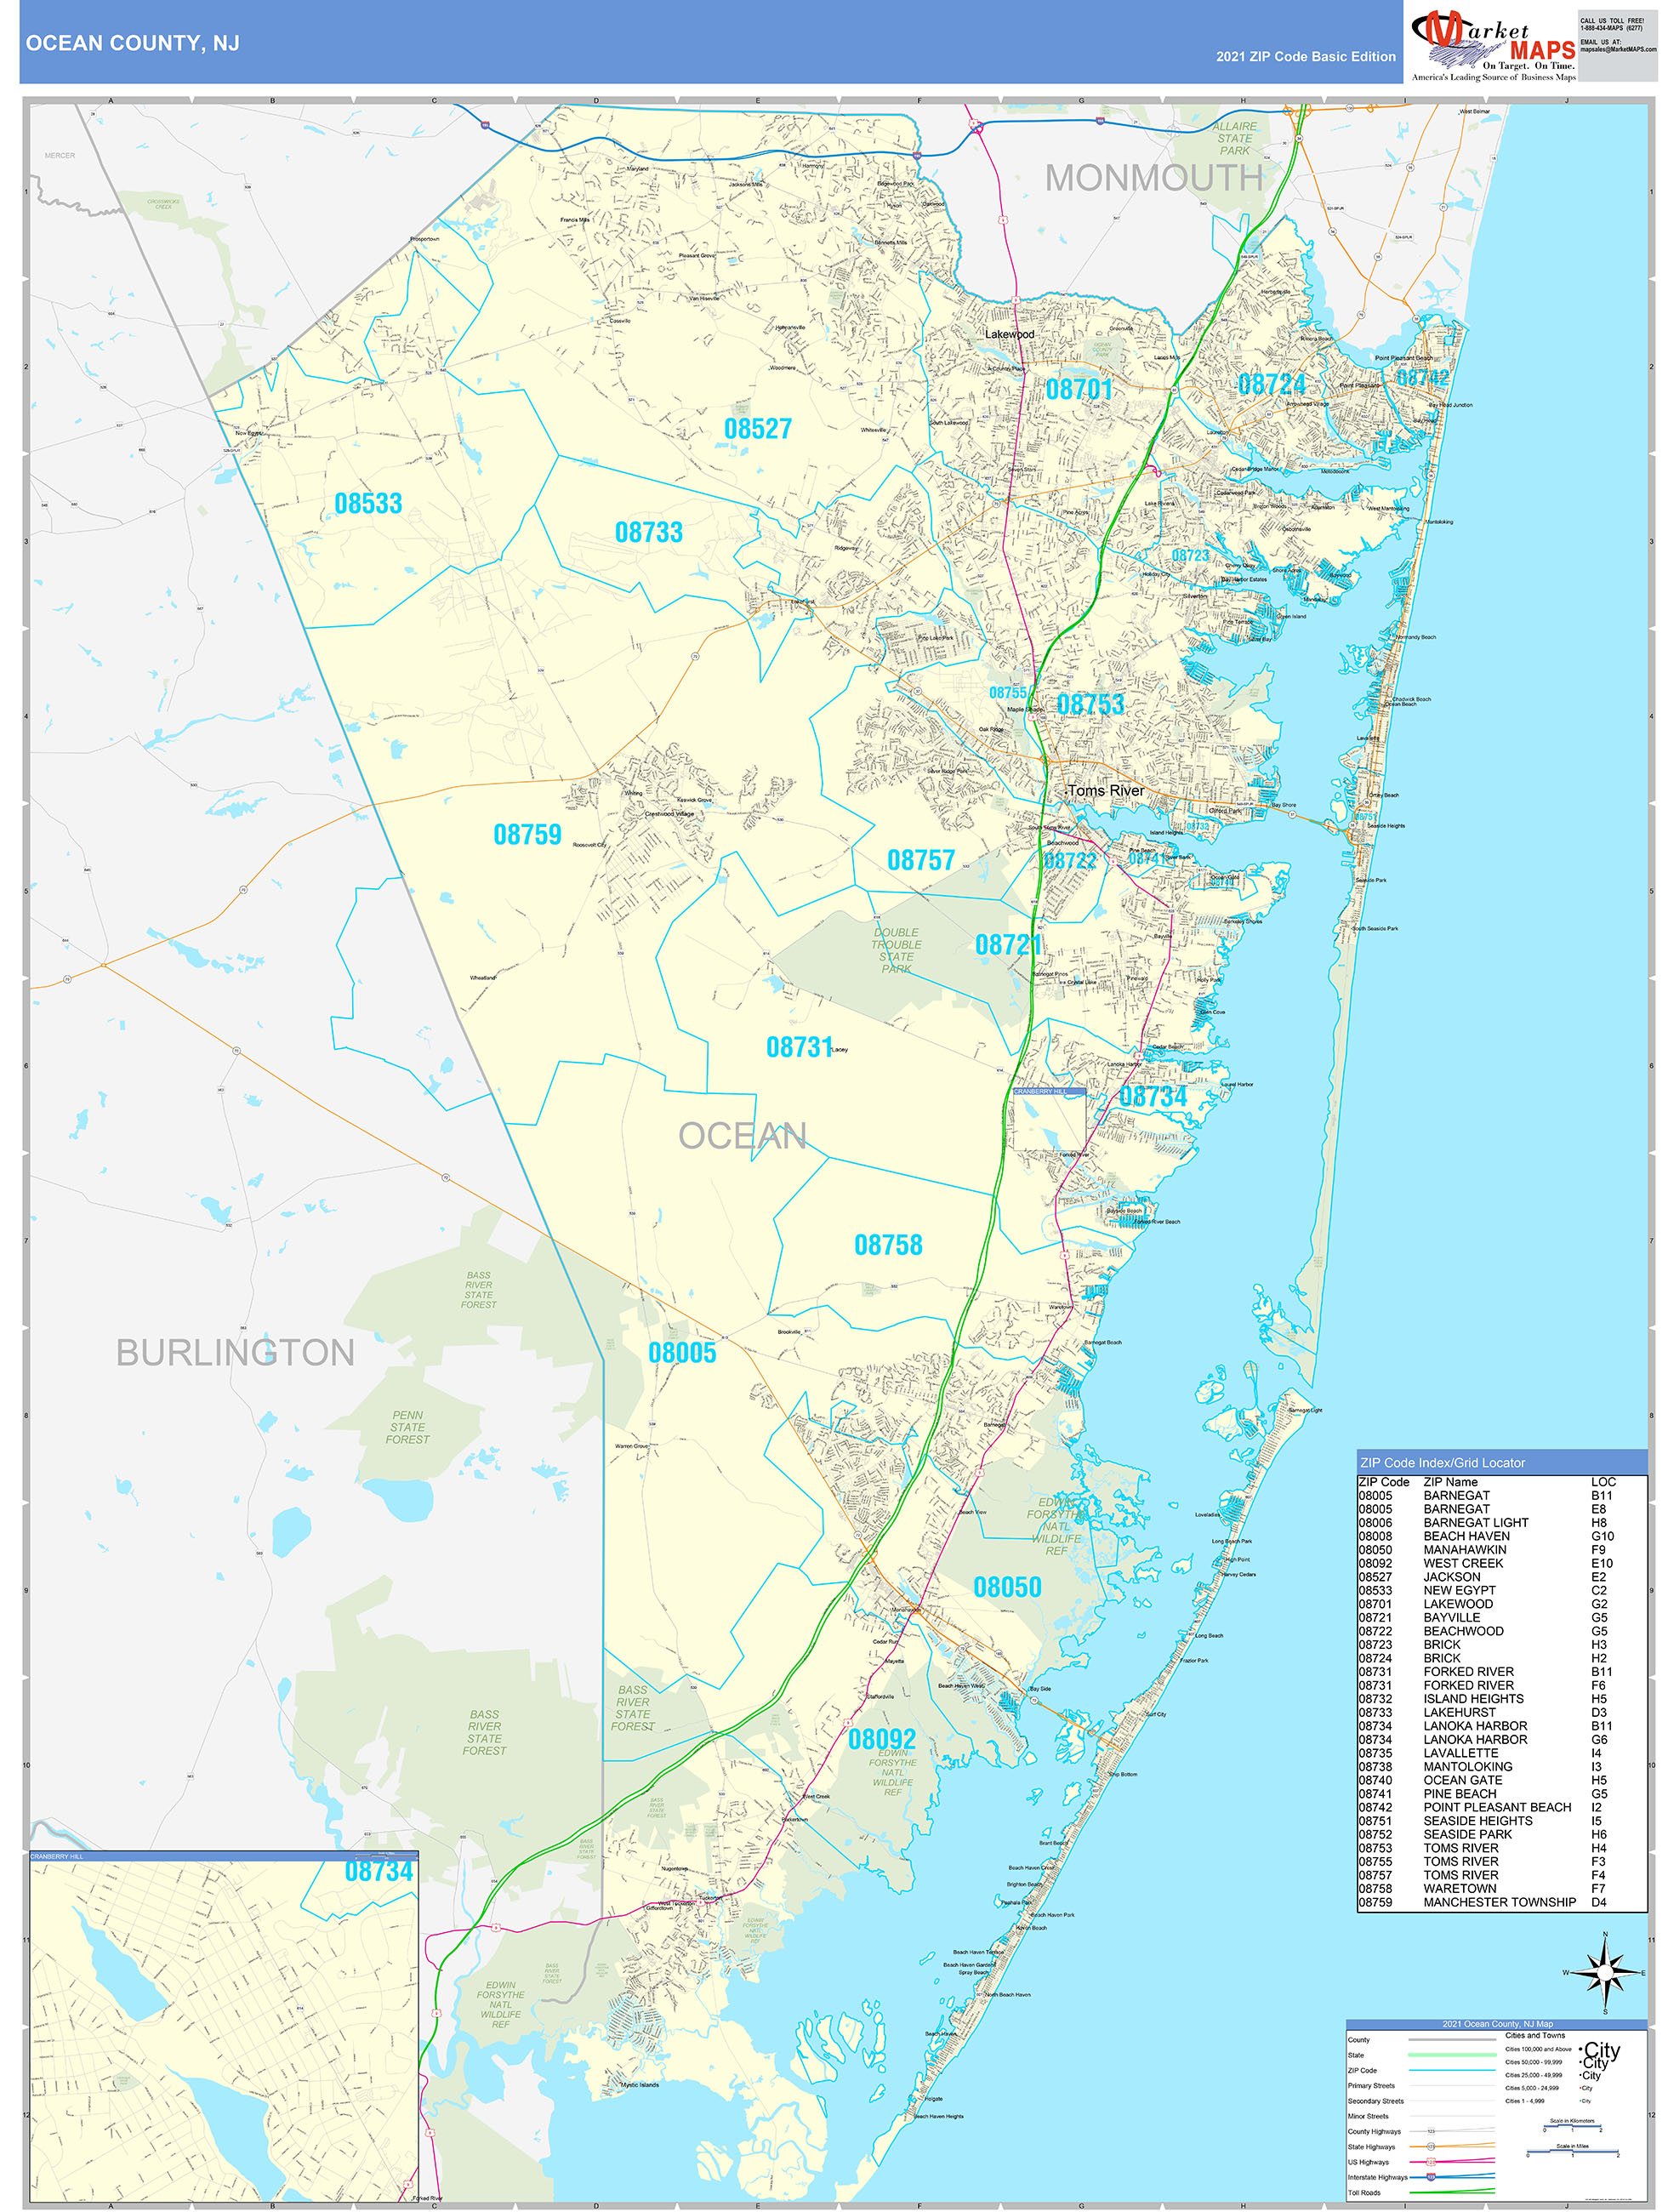 Ocean County Nj Zip Code Wall Map Basic Style By Marketmaps | Images ...